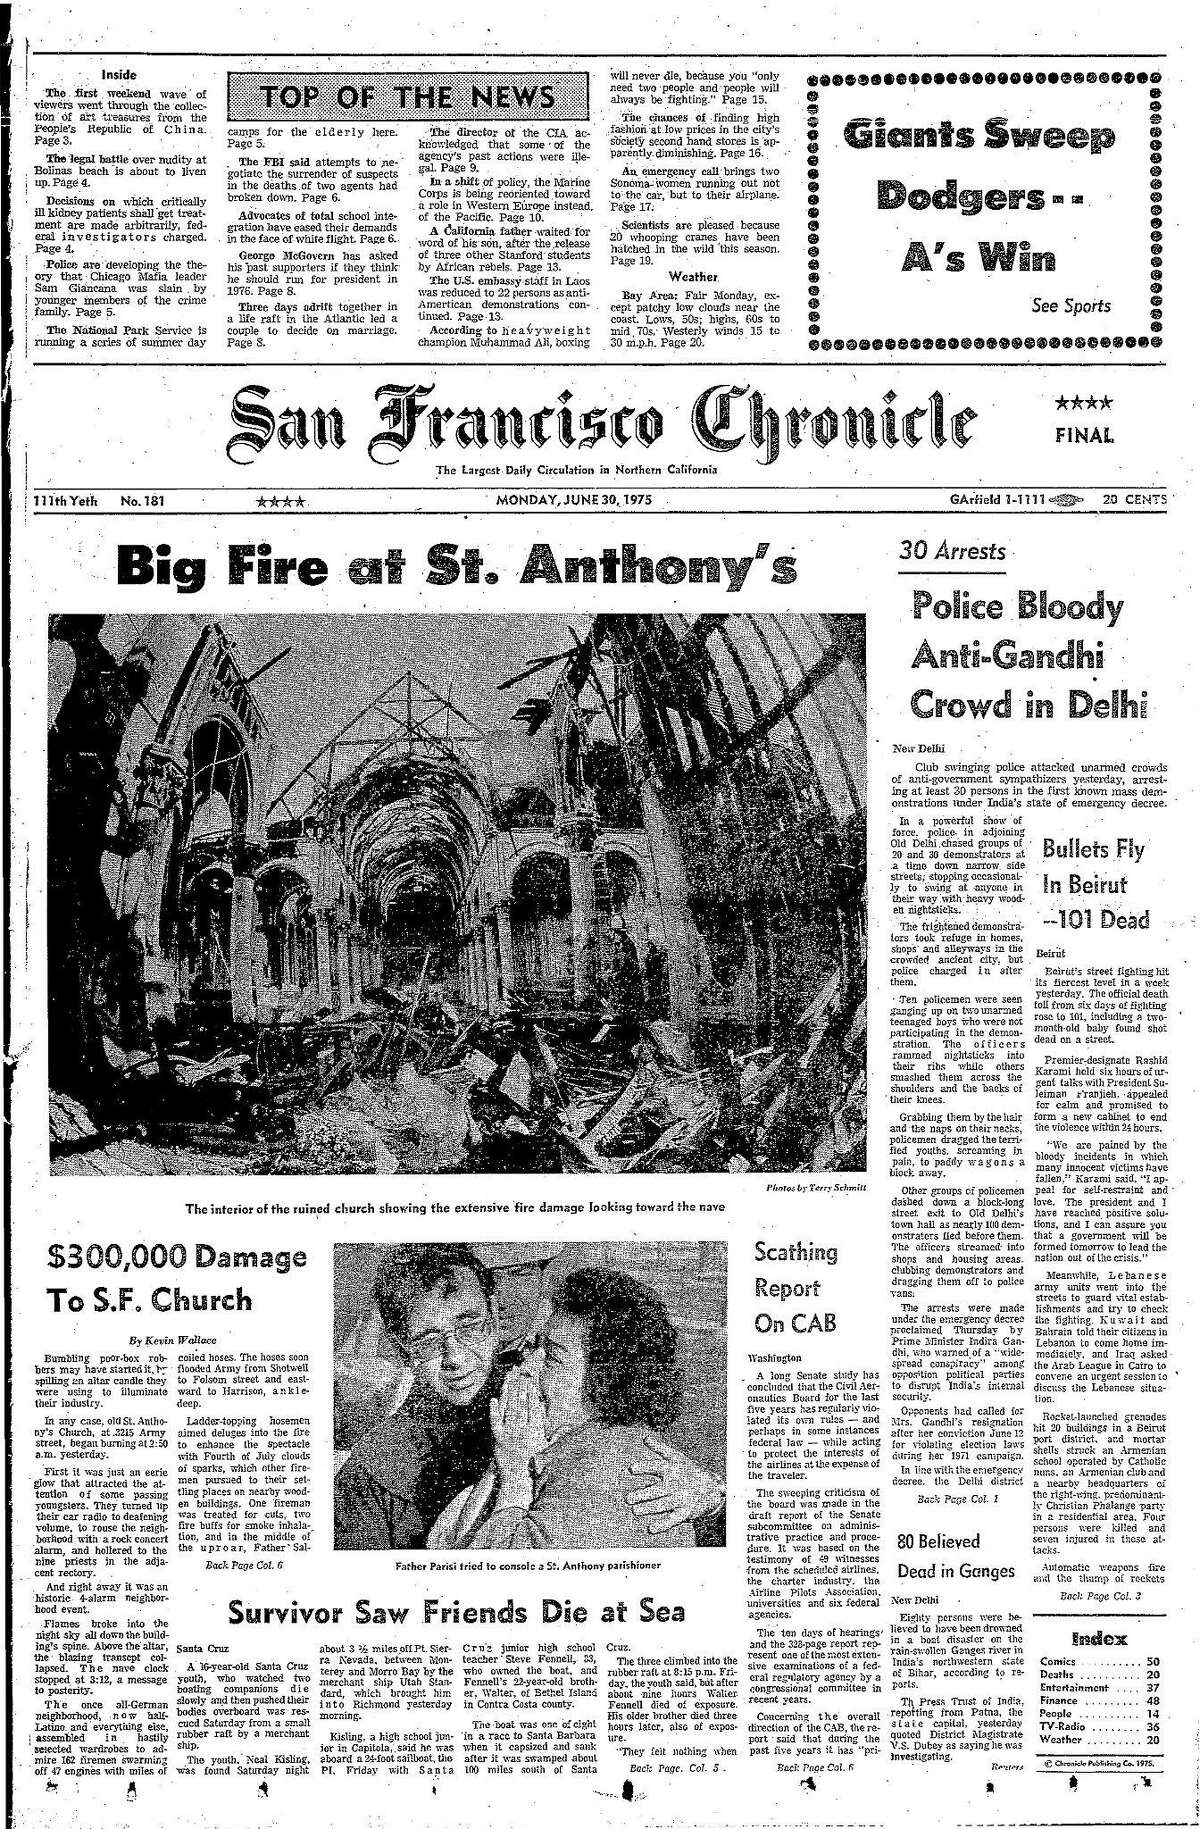 Historic Chronicle Front Page June 30, 1975 front page Huge fire destroys St. Anthony's Church in San Francisco Chron365, Chroncover